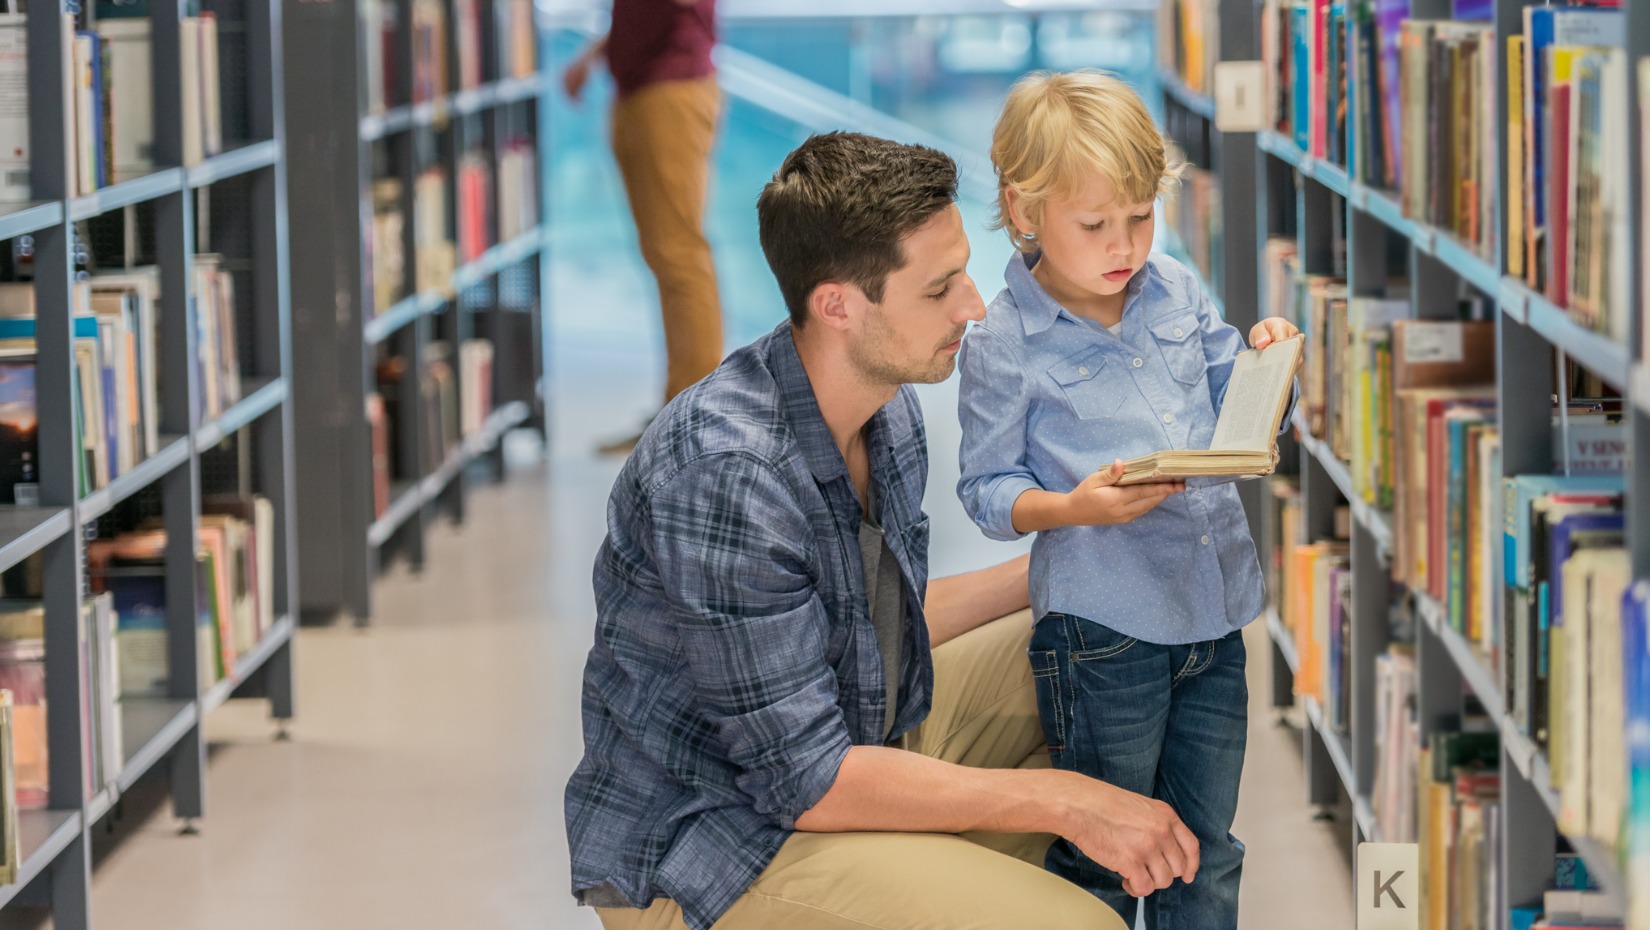 preschool-boy-with-his-father-in-public-library-picture-id1079677722